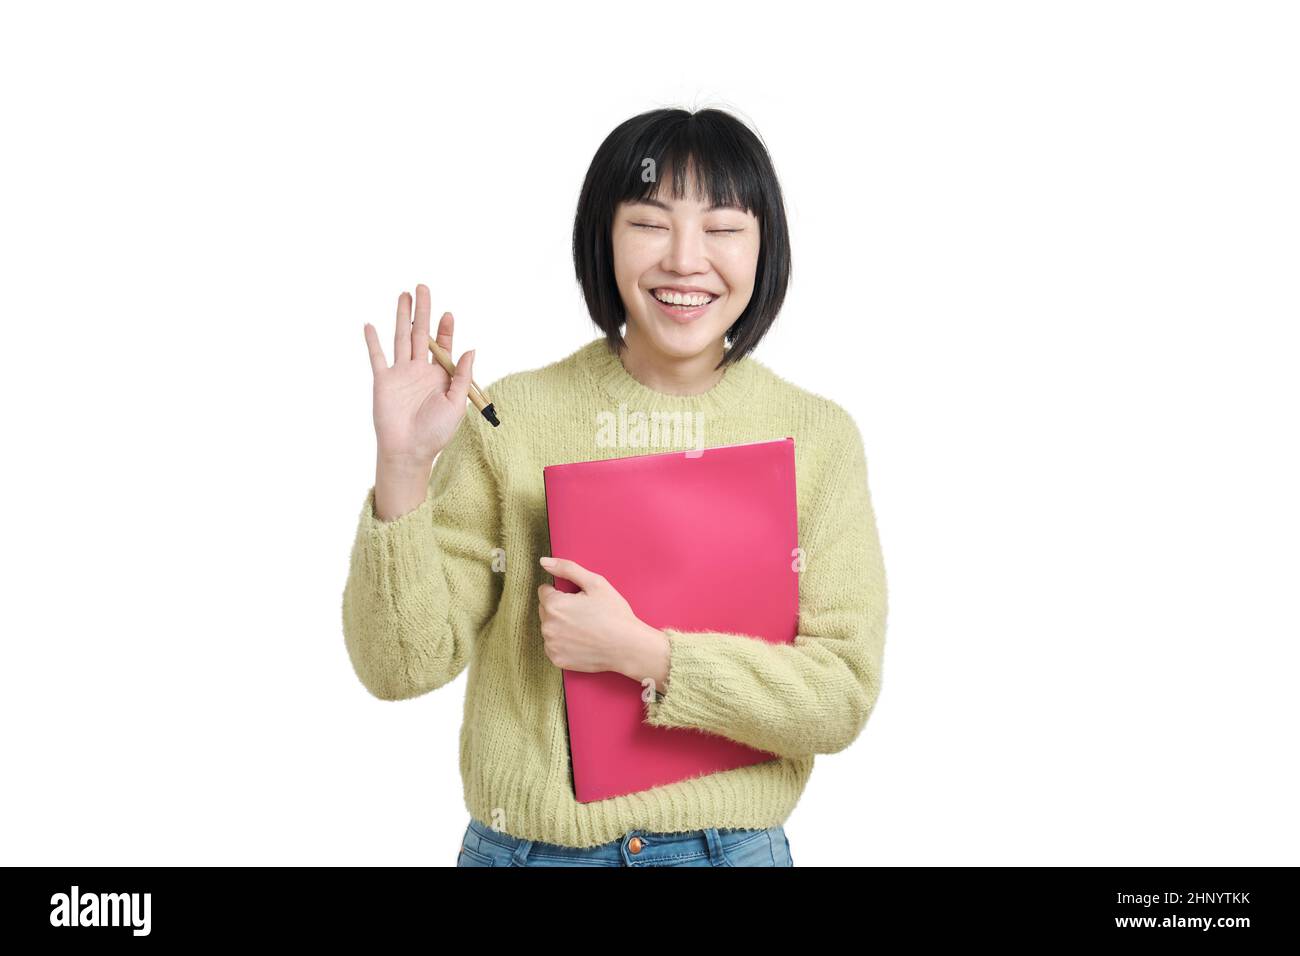 Young asian student smiling and waving hand with her eyes closed, isolated. Stock Photo